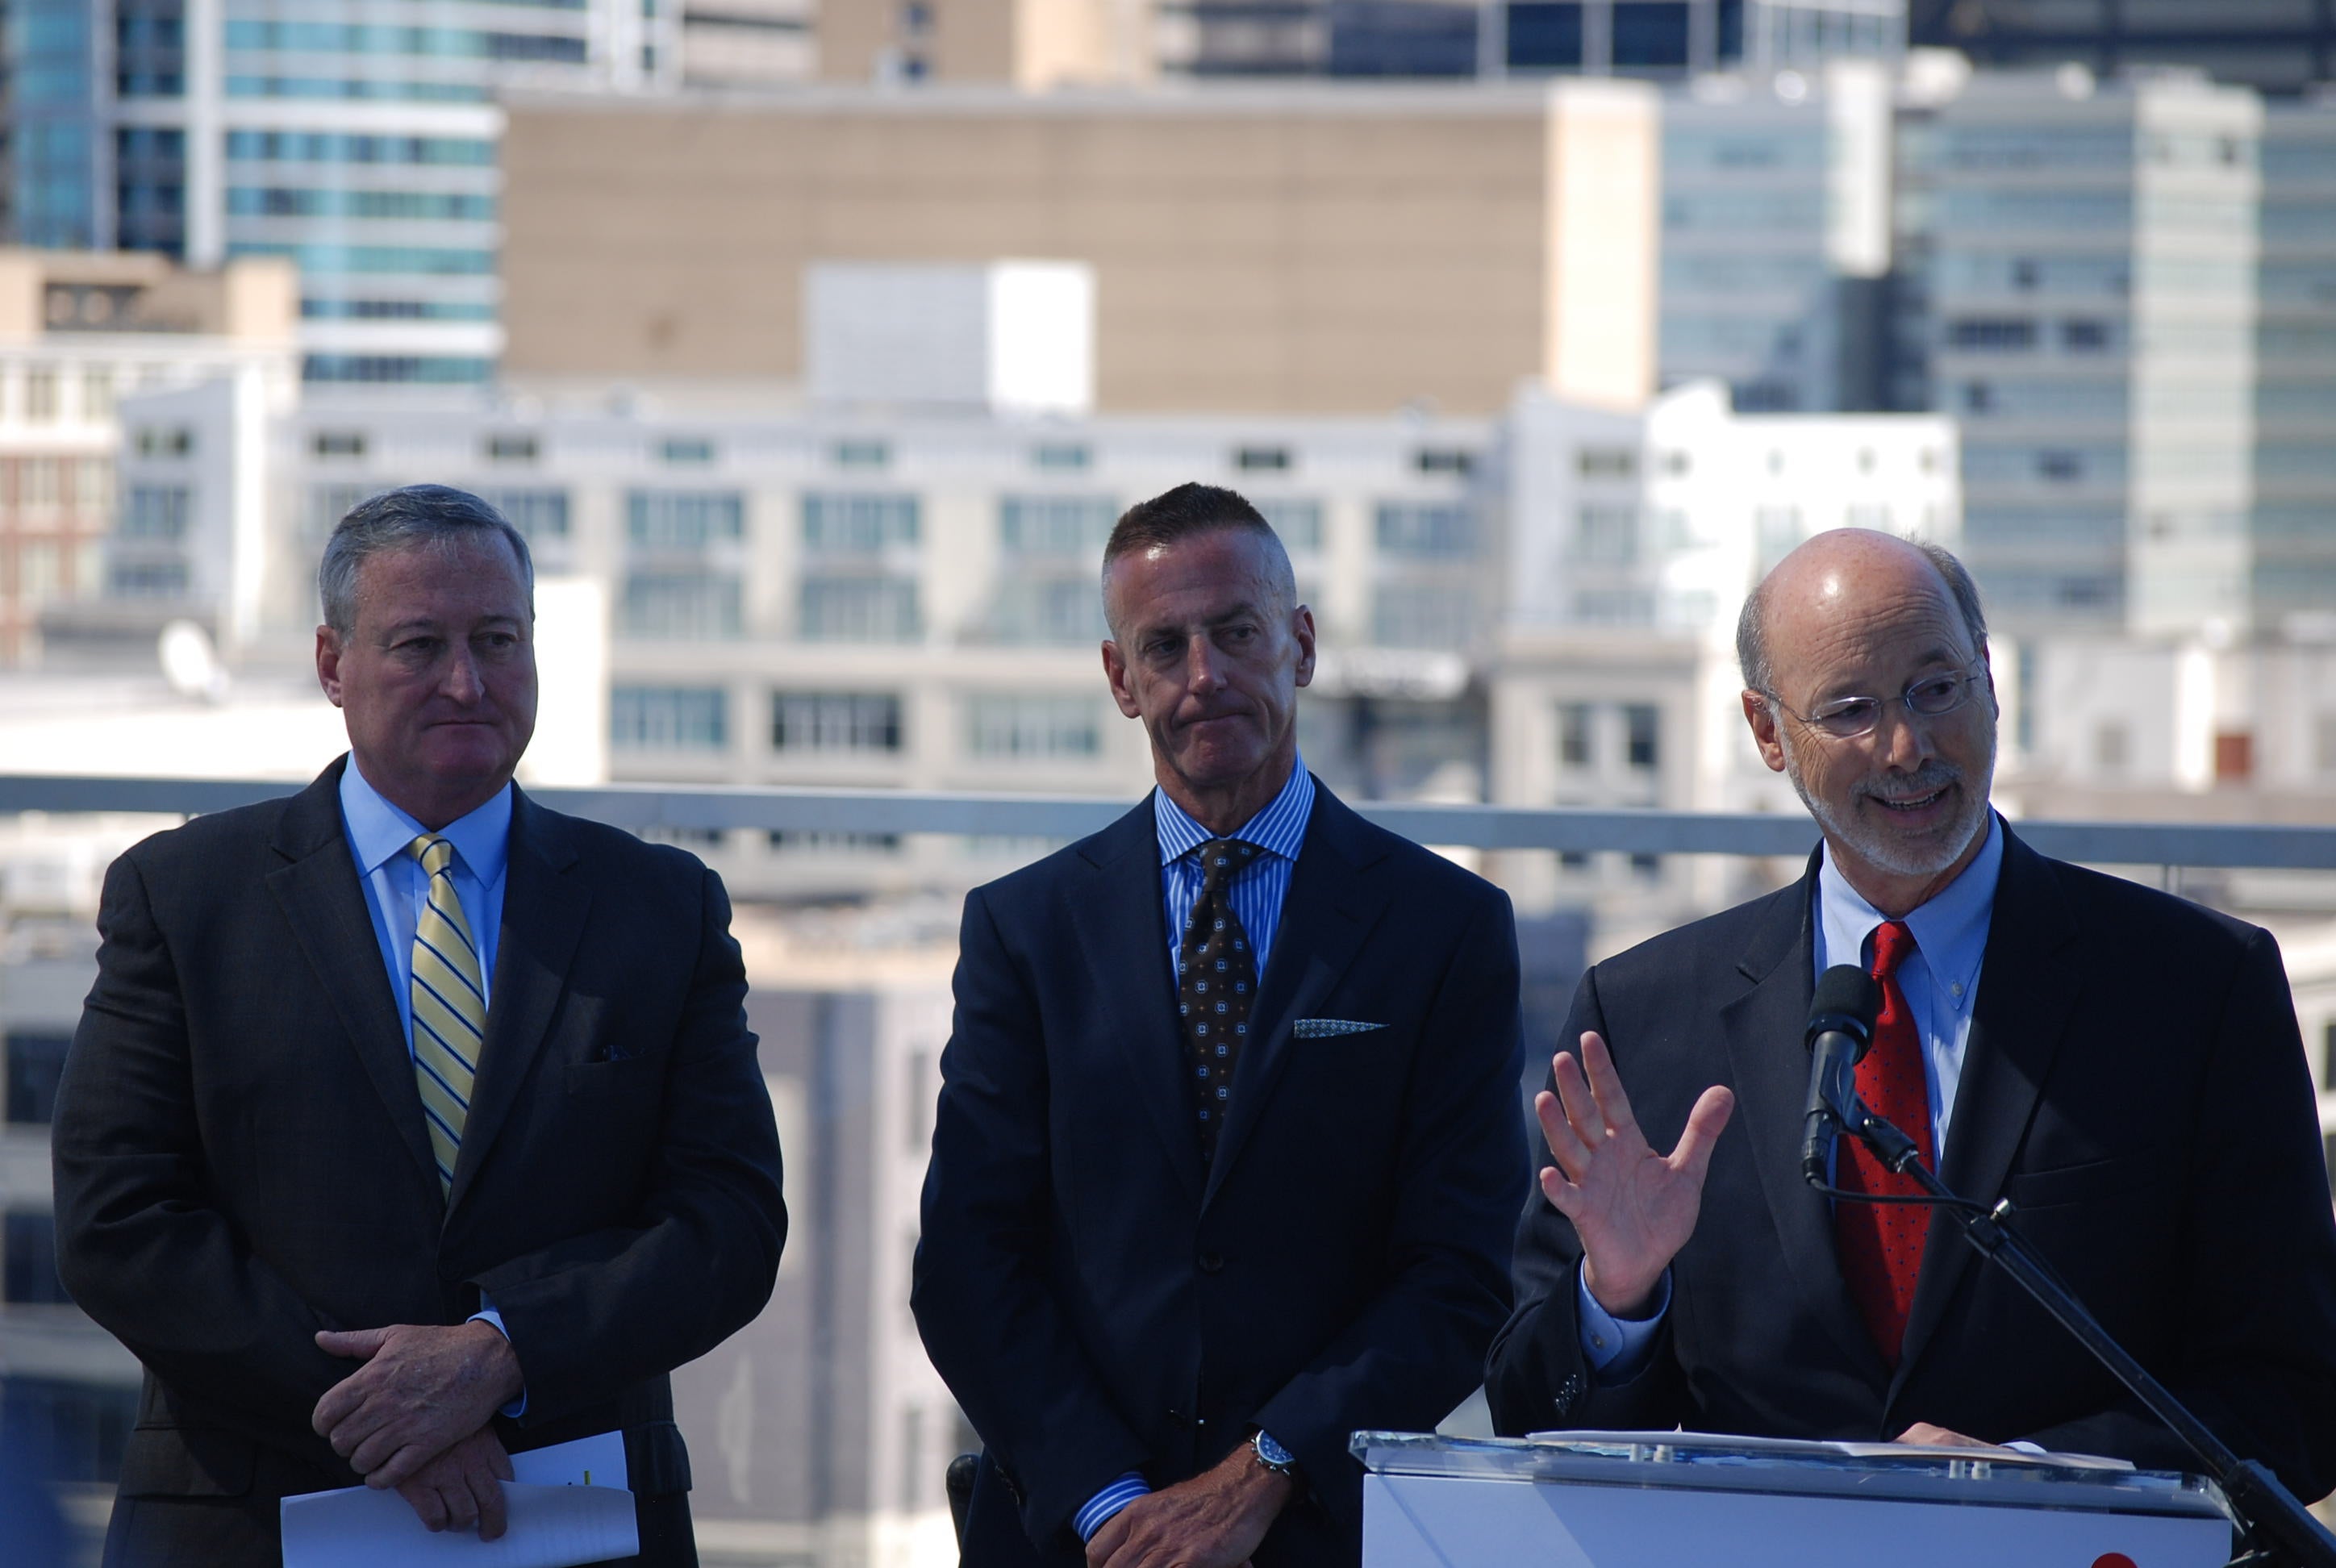 Announcing that Aramark Corp. will stay in Philadelphia are (from left)Mayor Jim Kenney